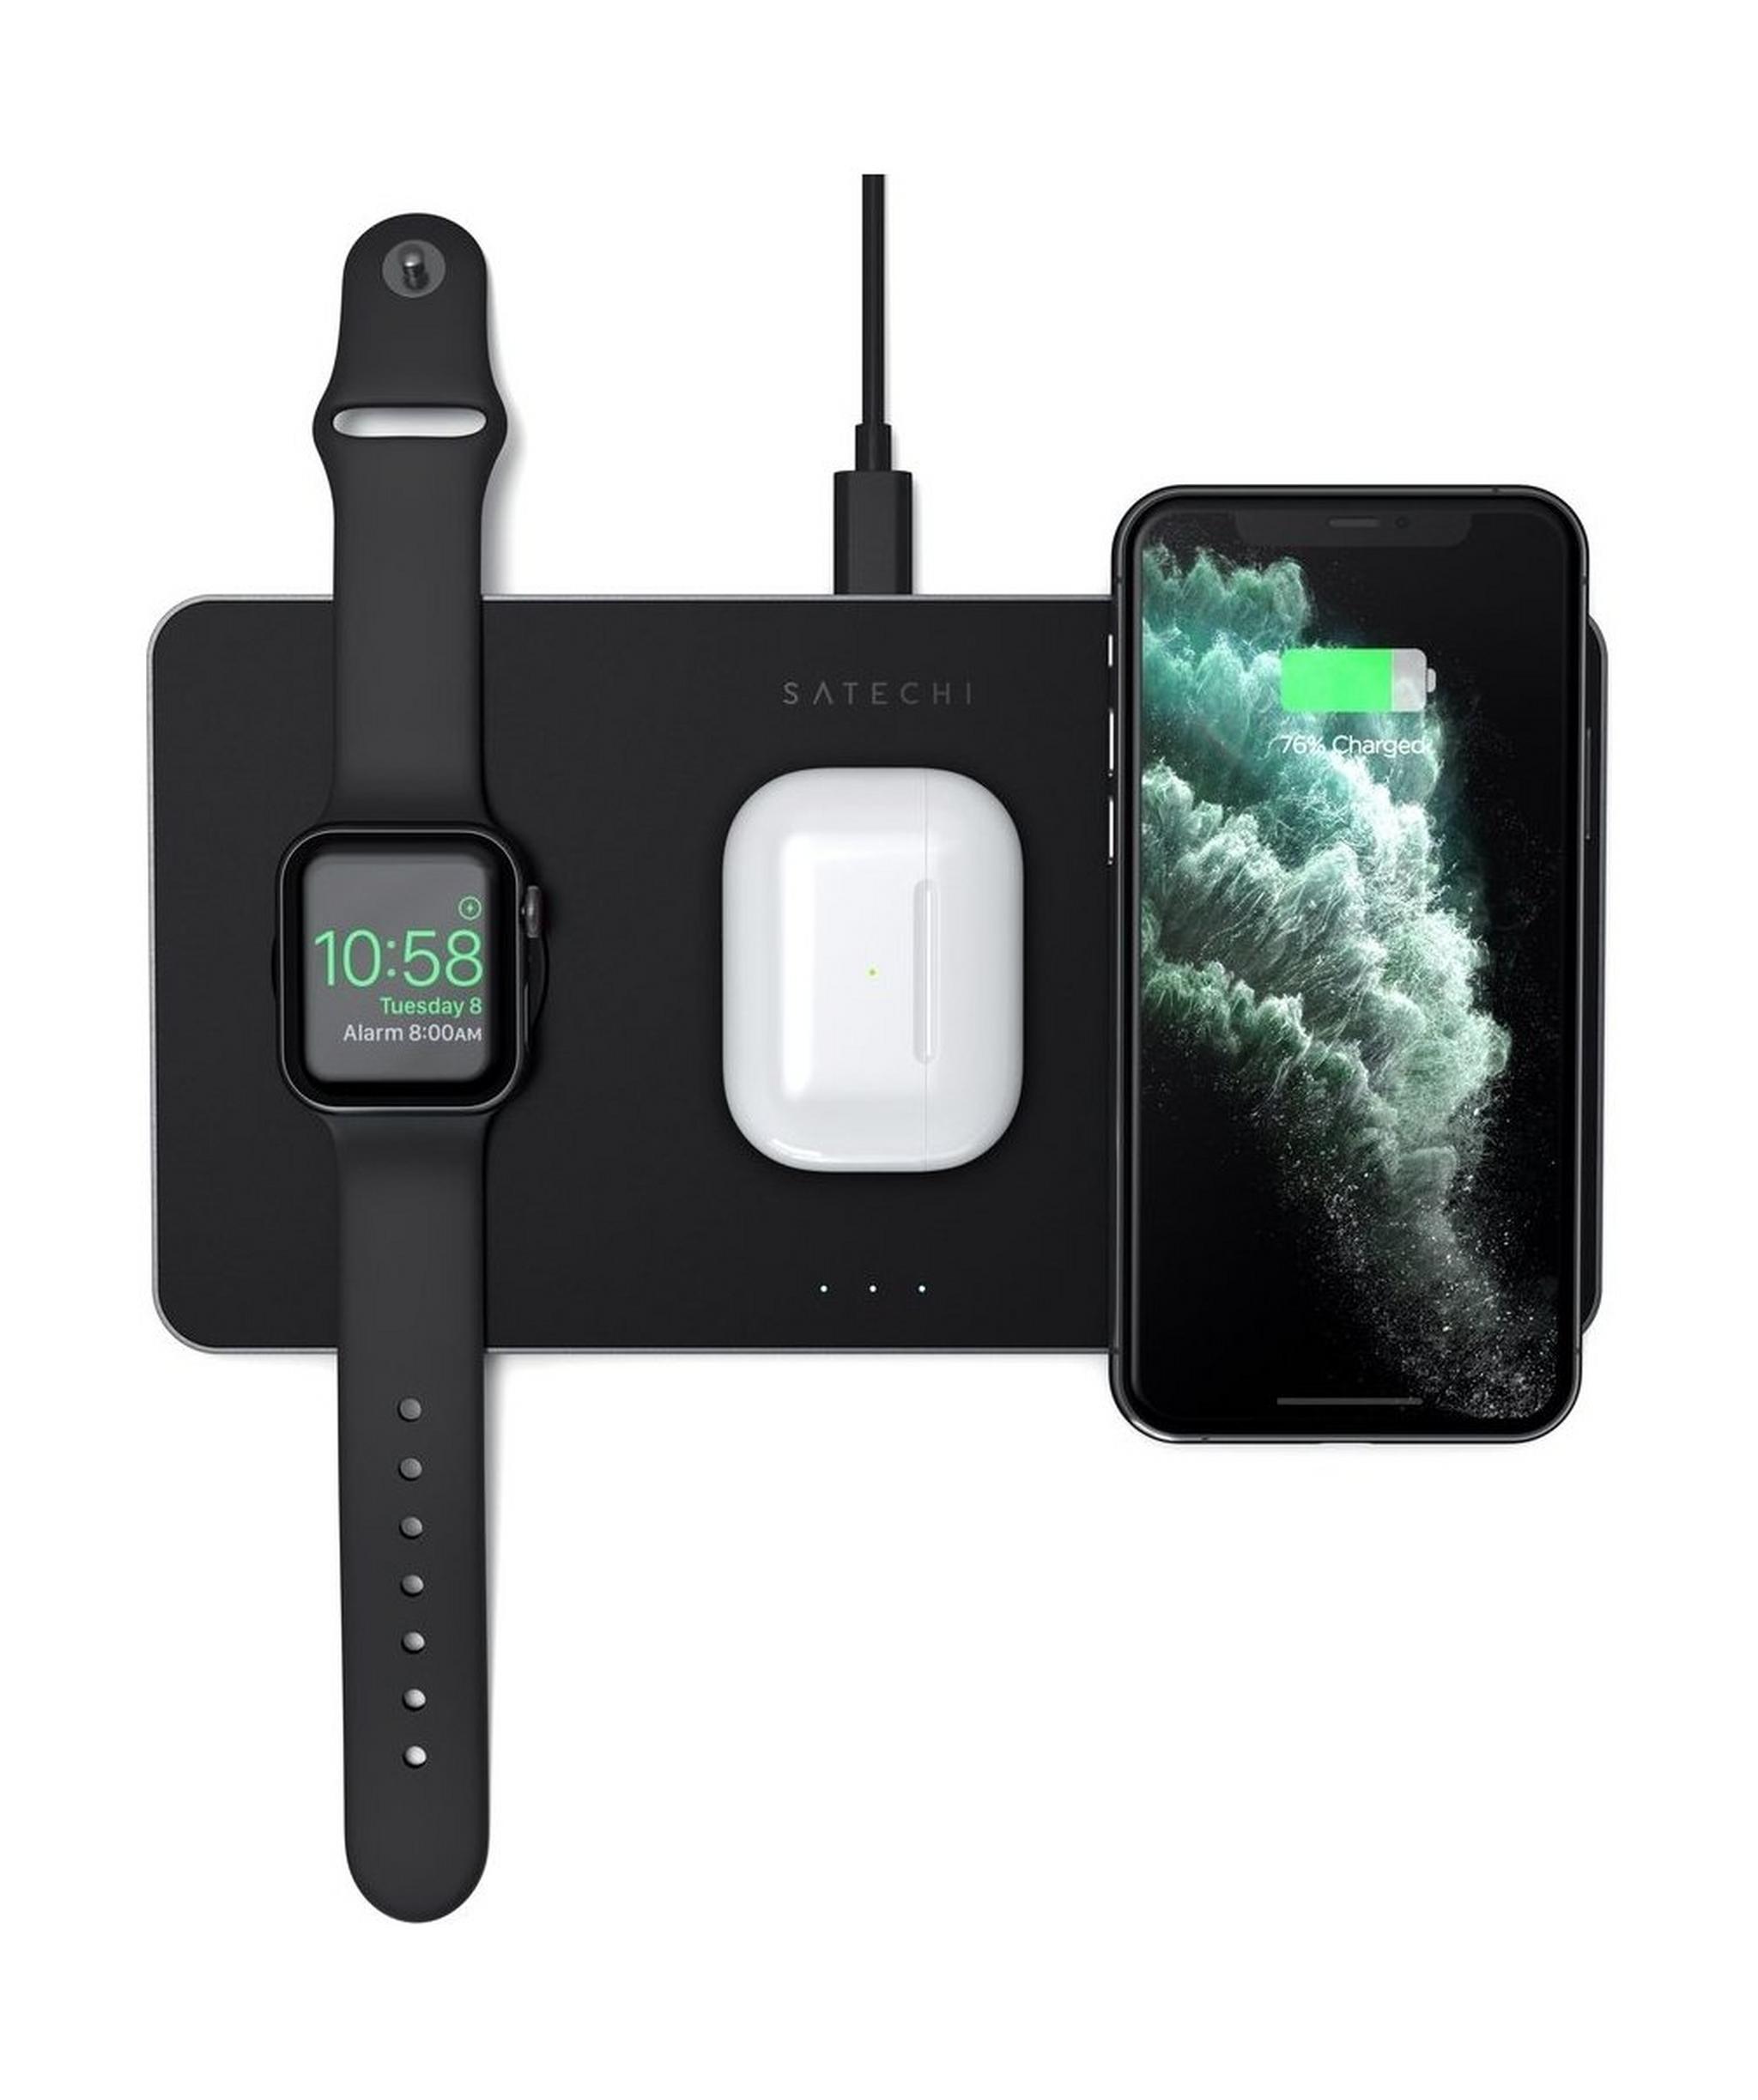 Satechi Trio Wireless Charging Pad For Apple